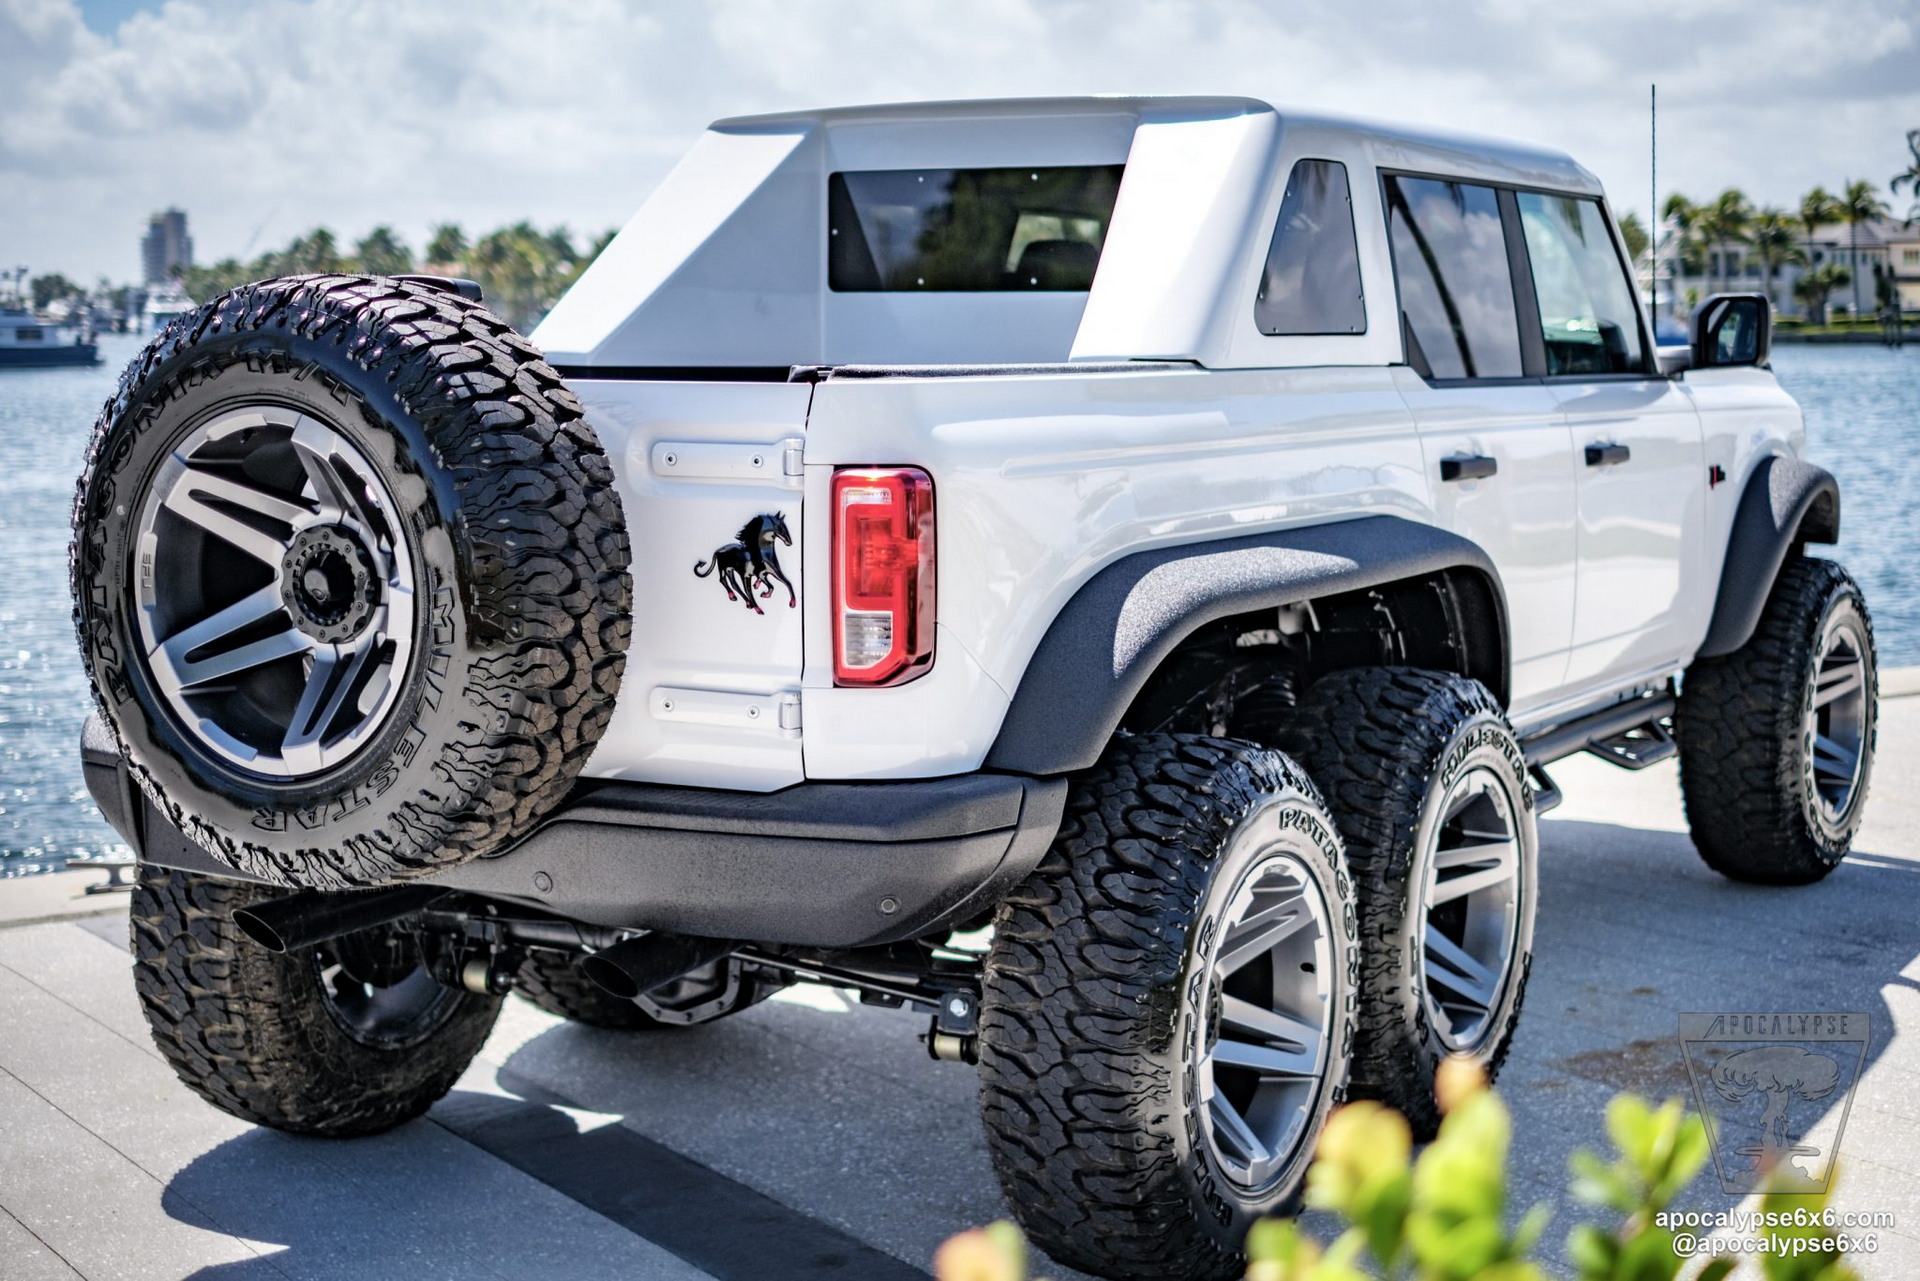 Apocalypse's 'The Dark Horse' Is a Fully-Bespoke 400-HP Ford Bronco 6×6